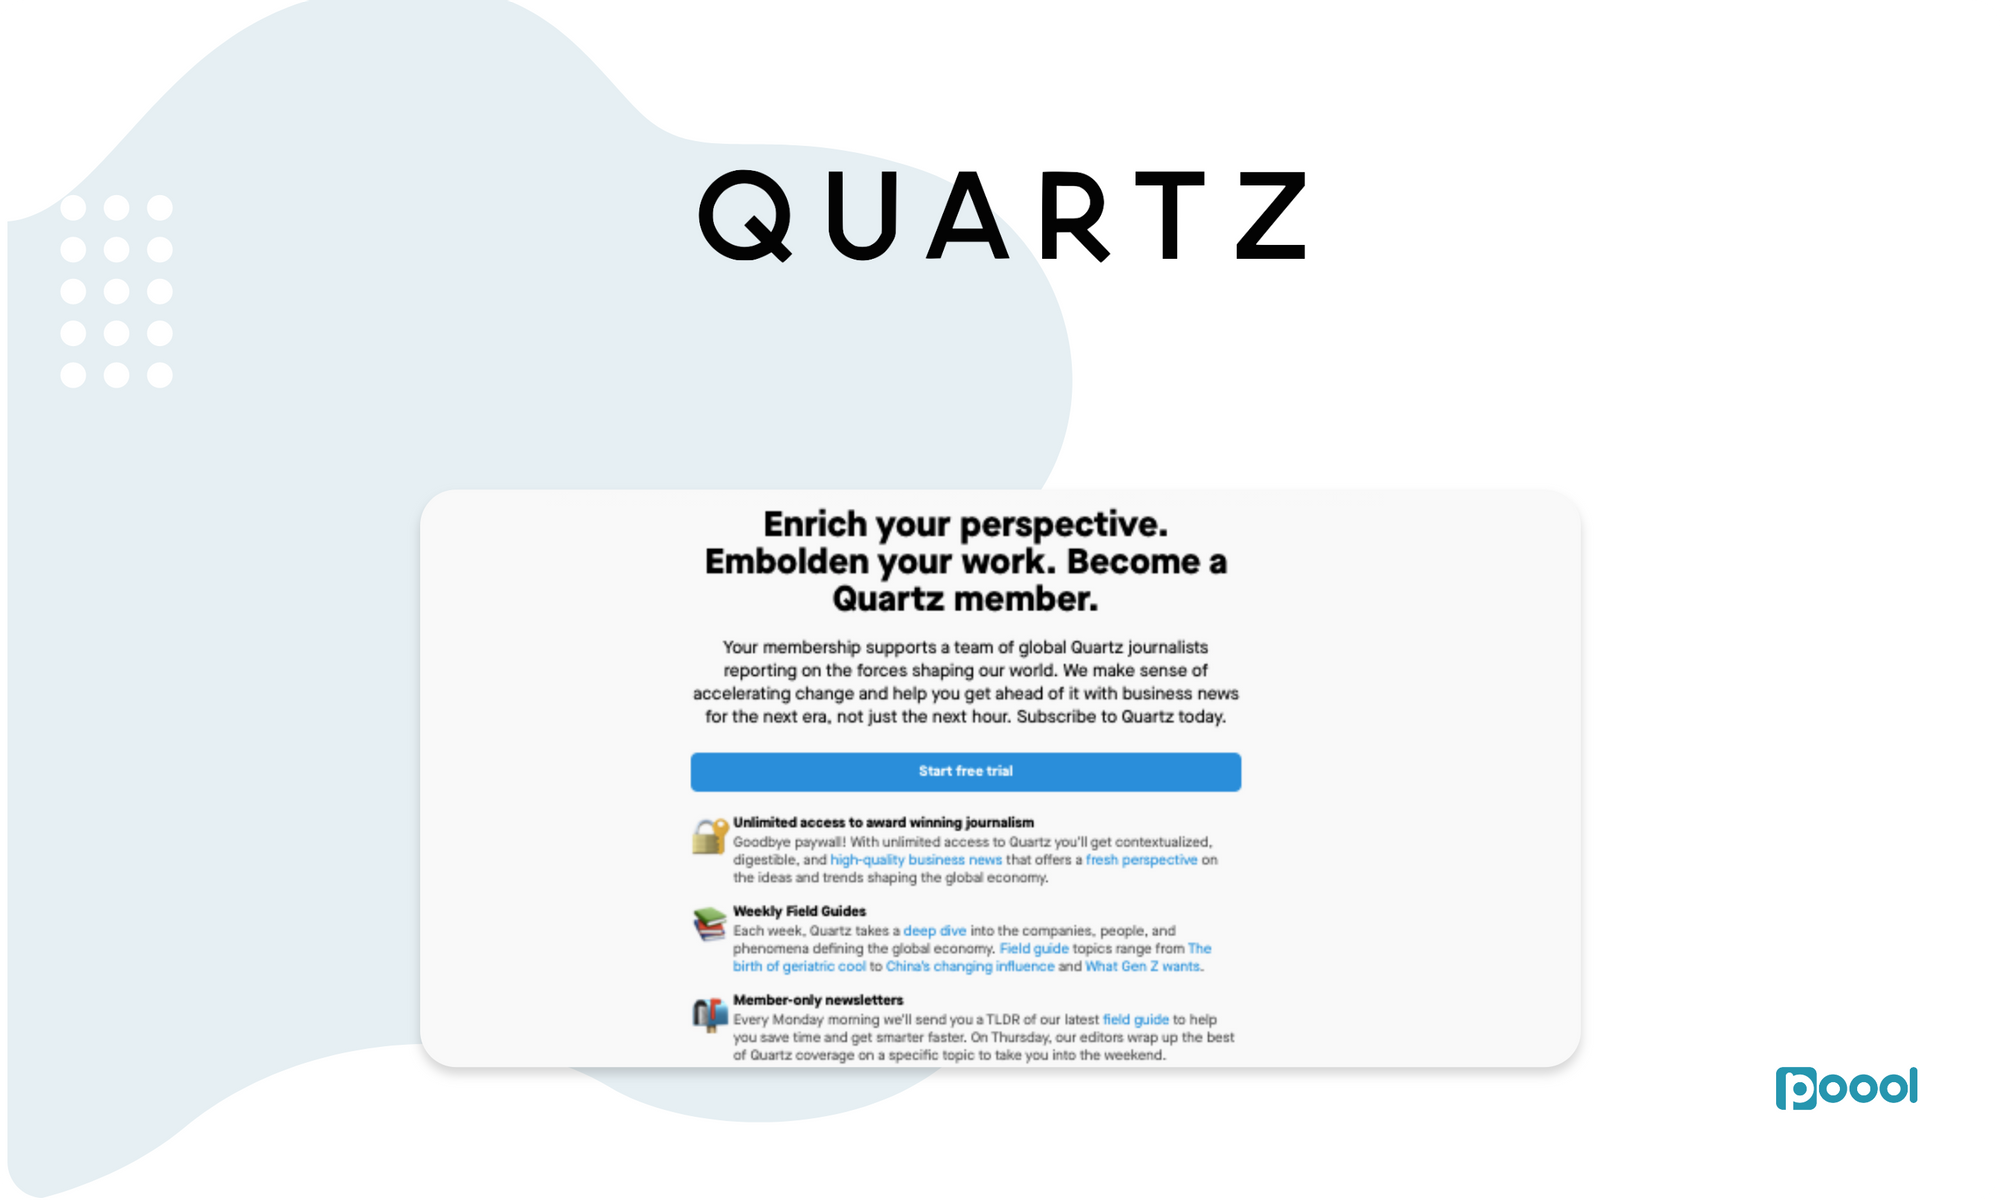 Quartz Paywall: From Content, to Subscription to Content | Series.